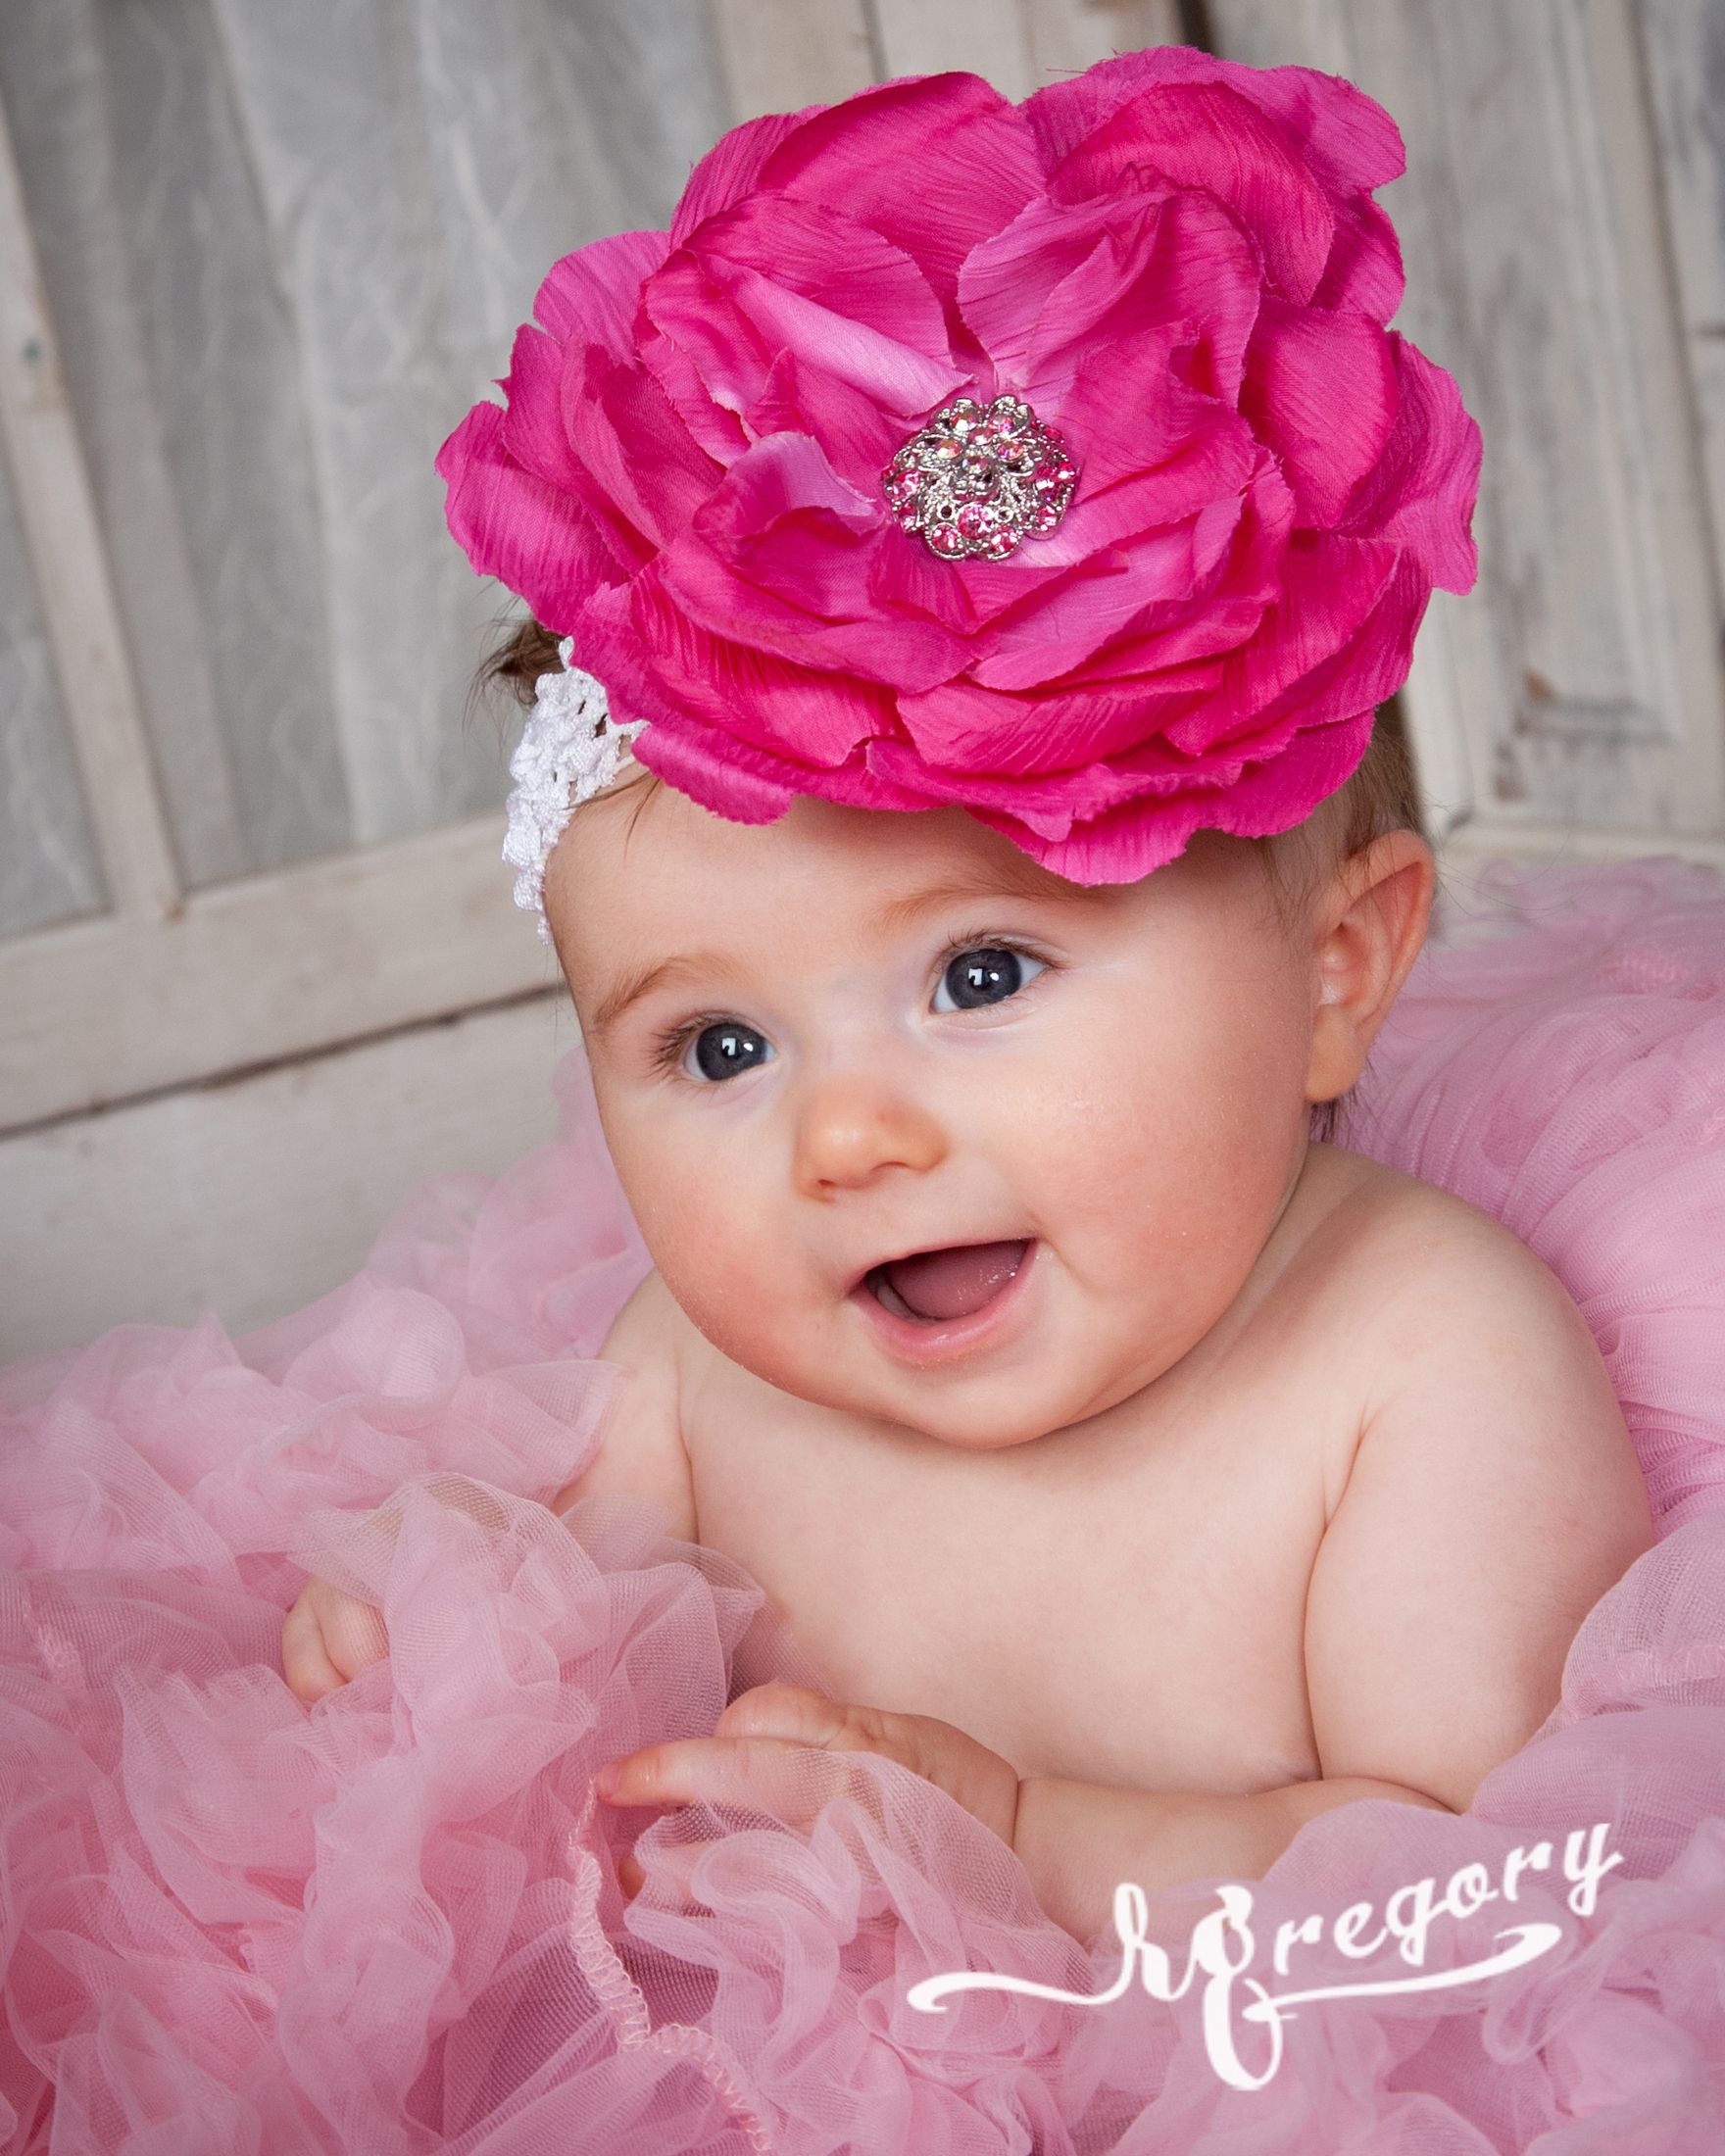 Kellam baby child photography girl in pink